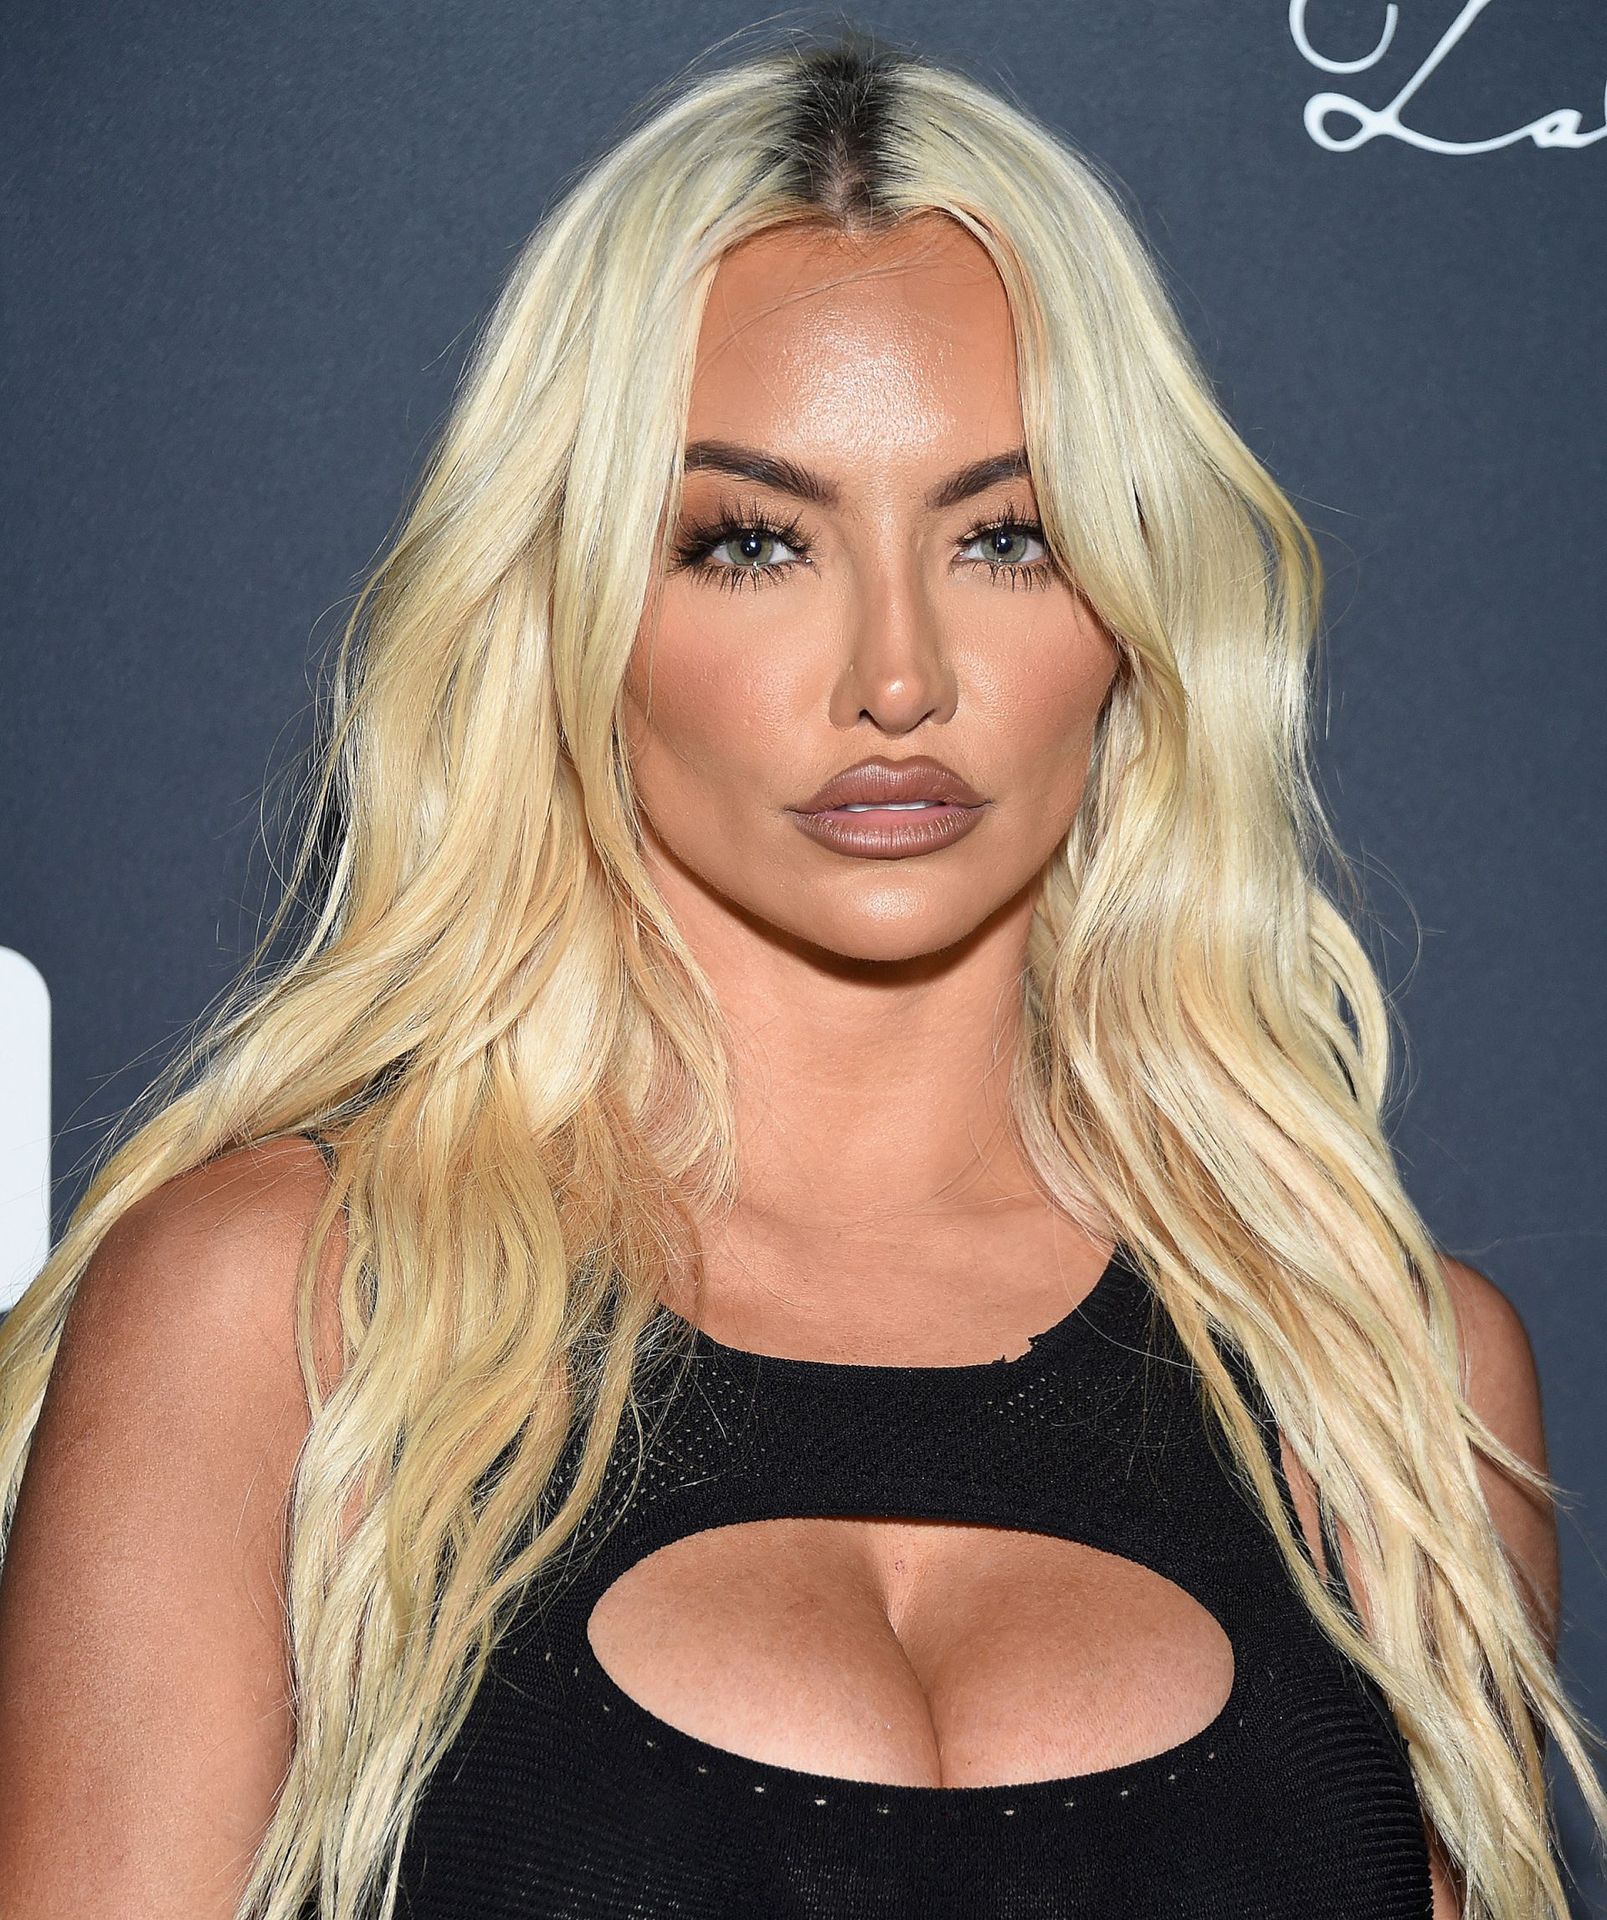 Lindsey Pelas Looks Hot at the 2021 MET Gal
a After-Party (21 Photos) [Updated]